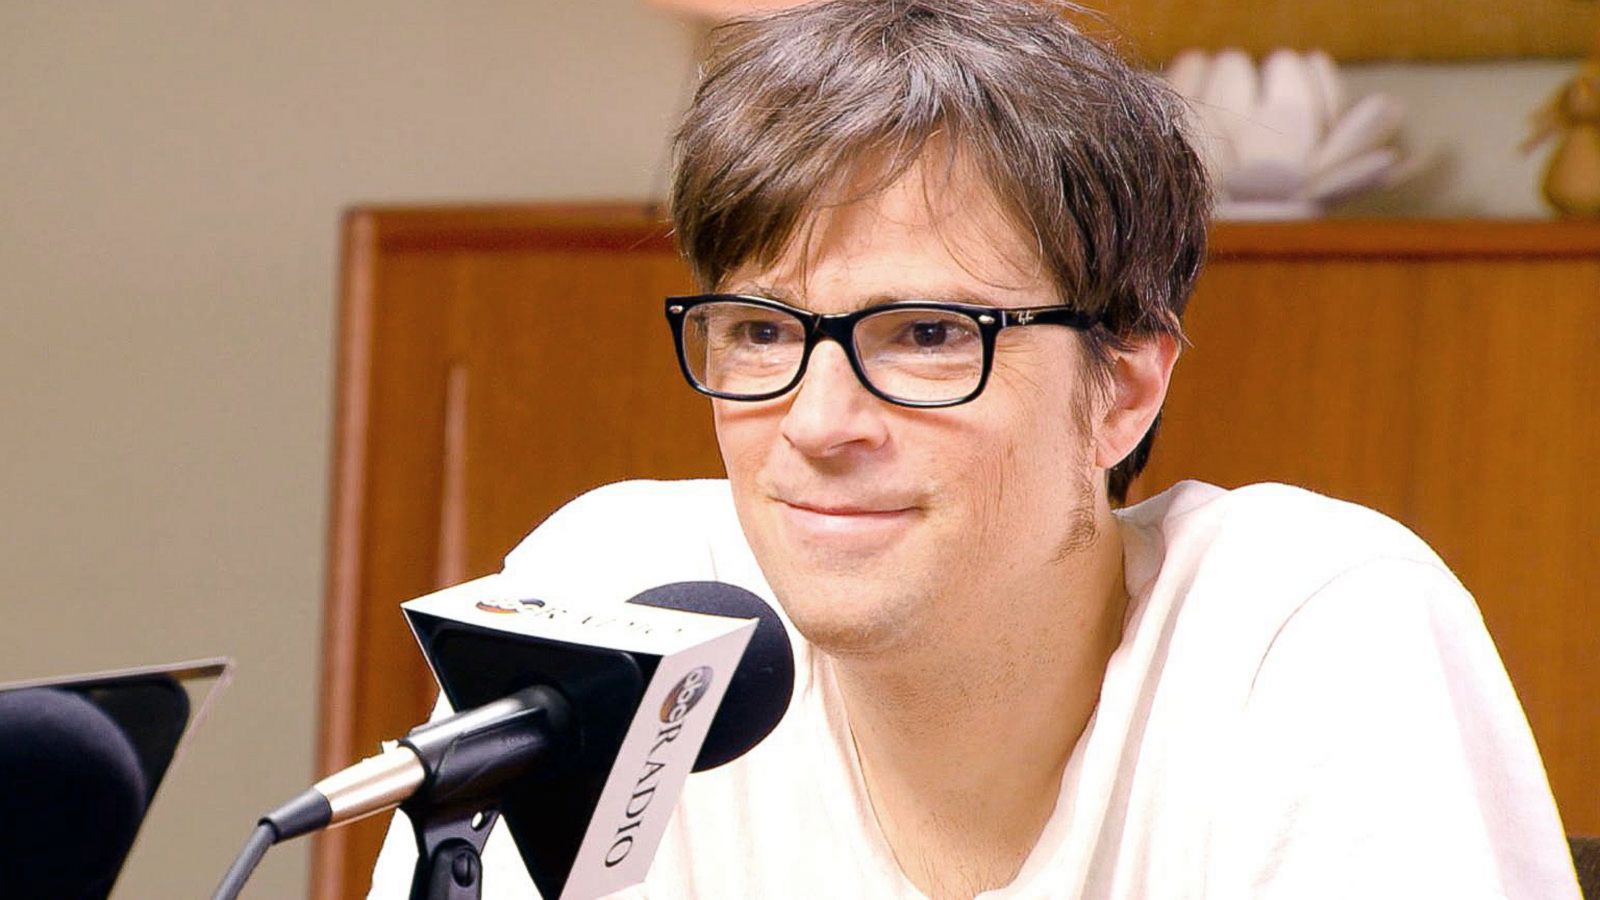 Rivers Cuomo Wallpapers